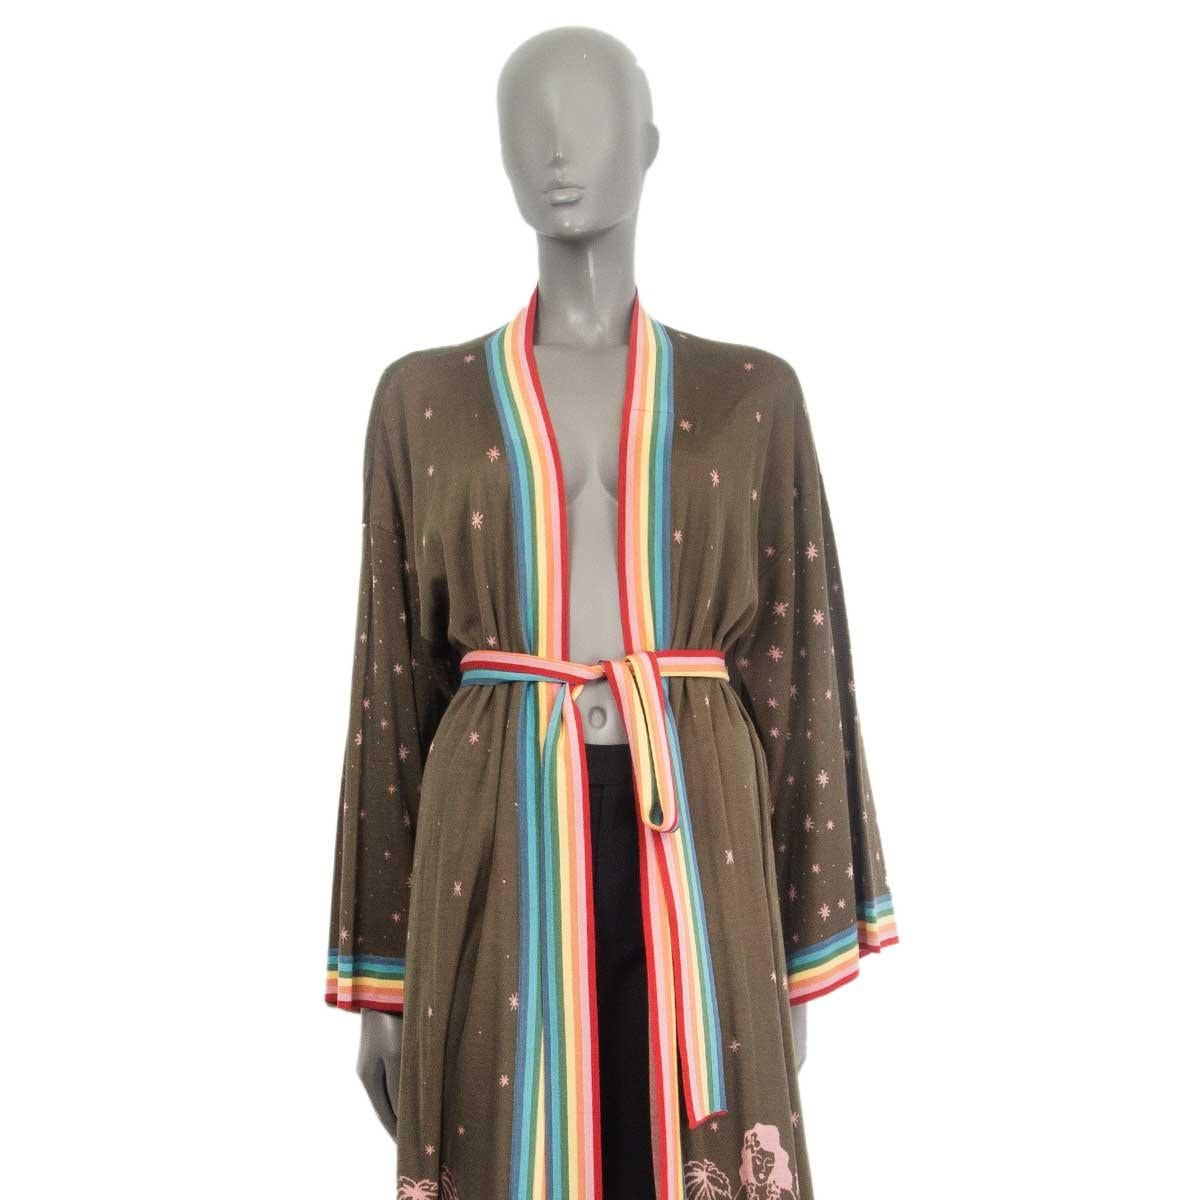 100% authentic Alanui oversized long cardigan in Hawaiian map print with rainbow-striped trim in olive green and pale rose silk (100%). Has a shawl collar, drop shoulders, a detachable self-tie belt and side seam pockets. Has been worn and is in